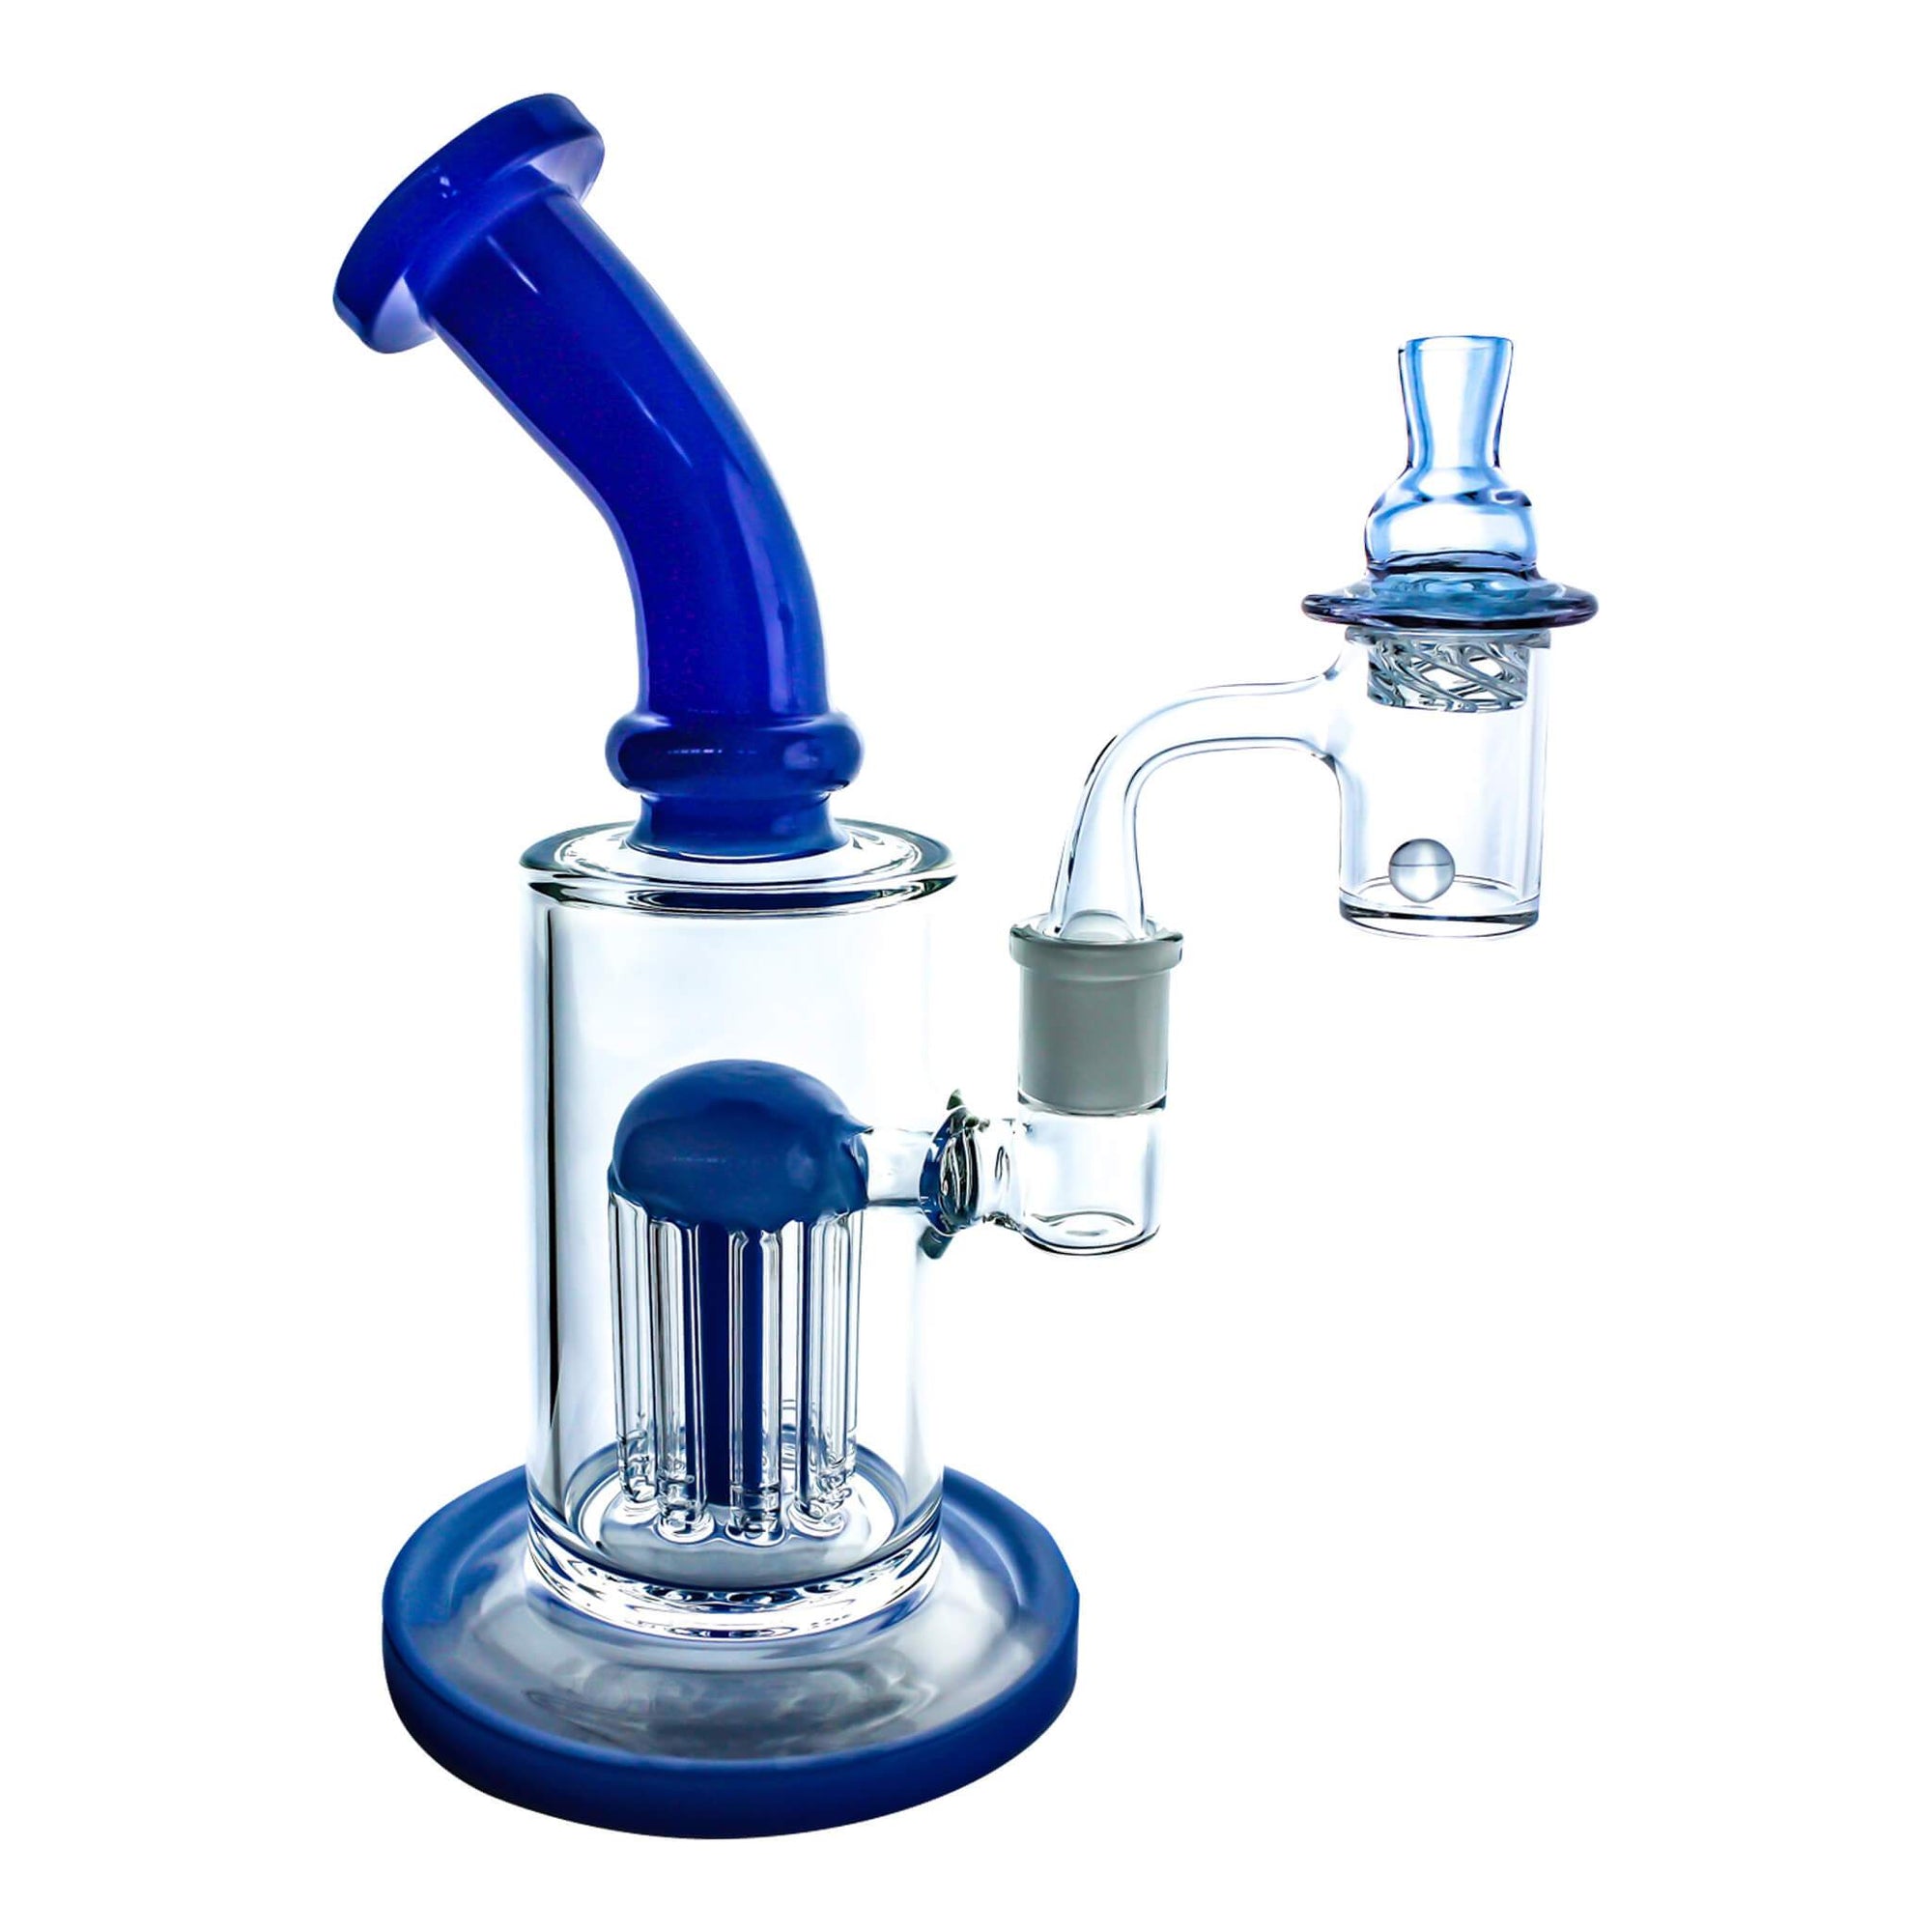 25mm Seamless Banger Rig Bundle | Whole Dabbing Kit View | the dabbing specialists